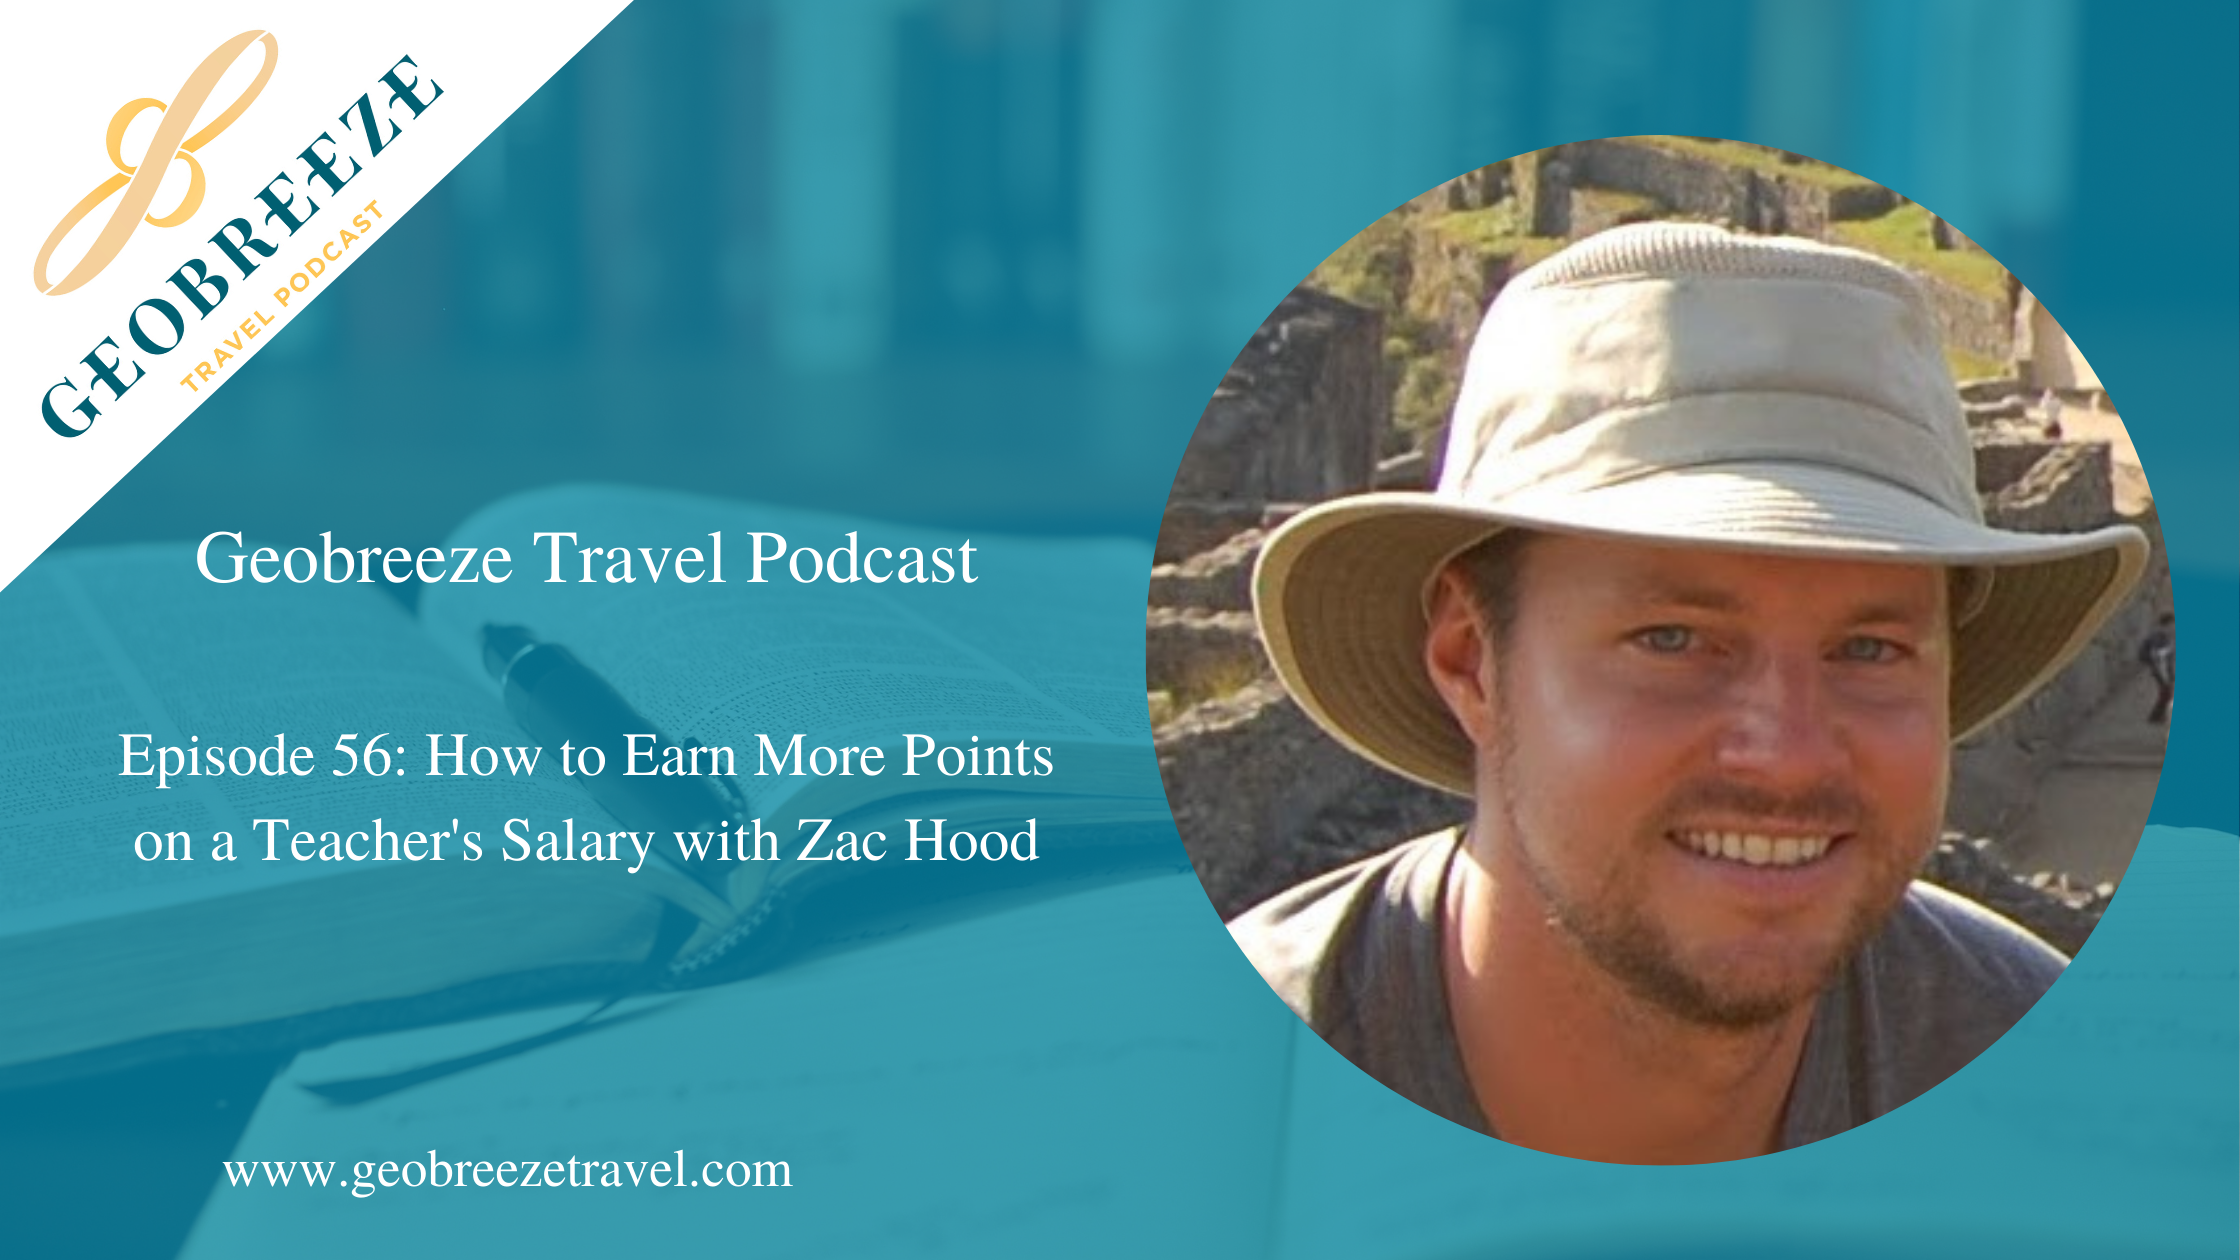 Episode 56: How to Earn More Points on a Teacher’s Salary with Zac Hood